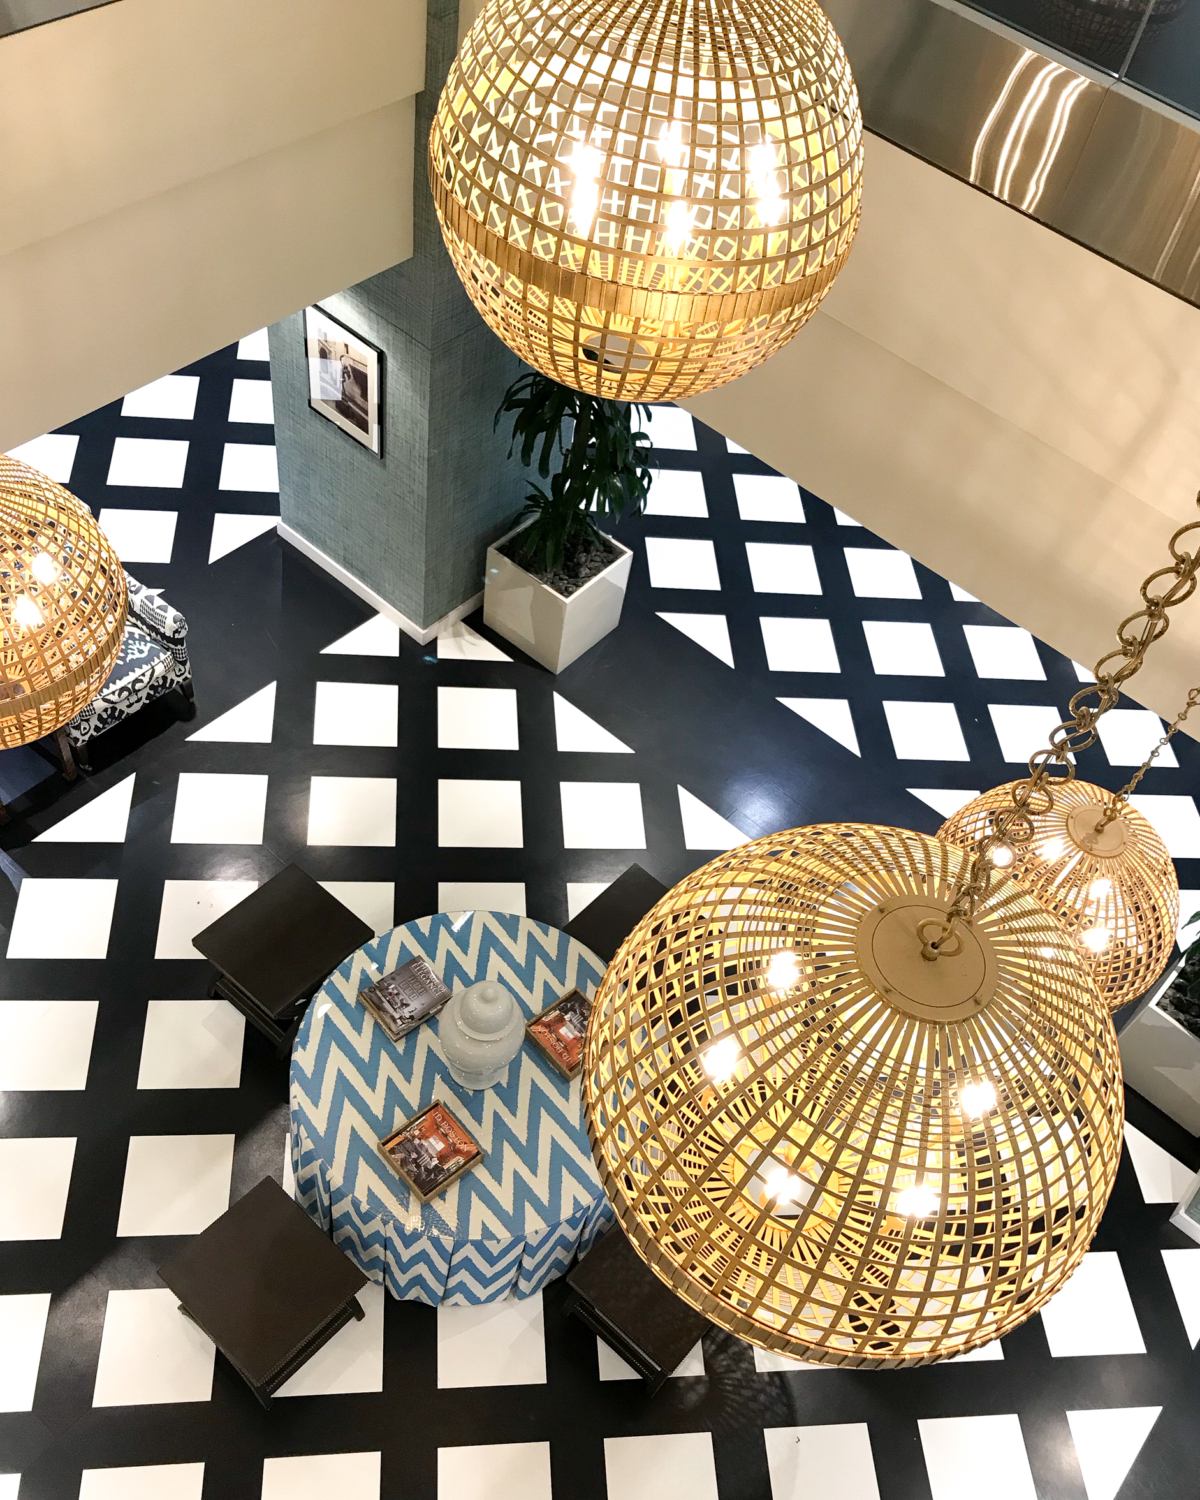 A recap of the 2017 Boston Design Market - an annual event hosted by the Boston Design Center centering around what is new and exciting in interior design.